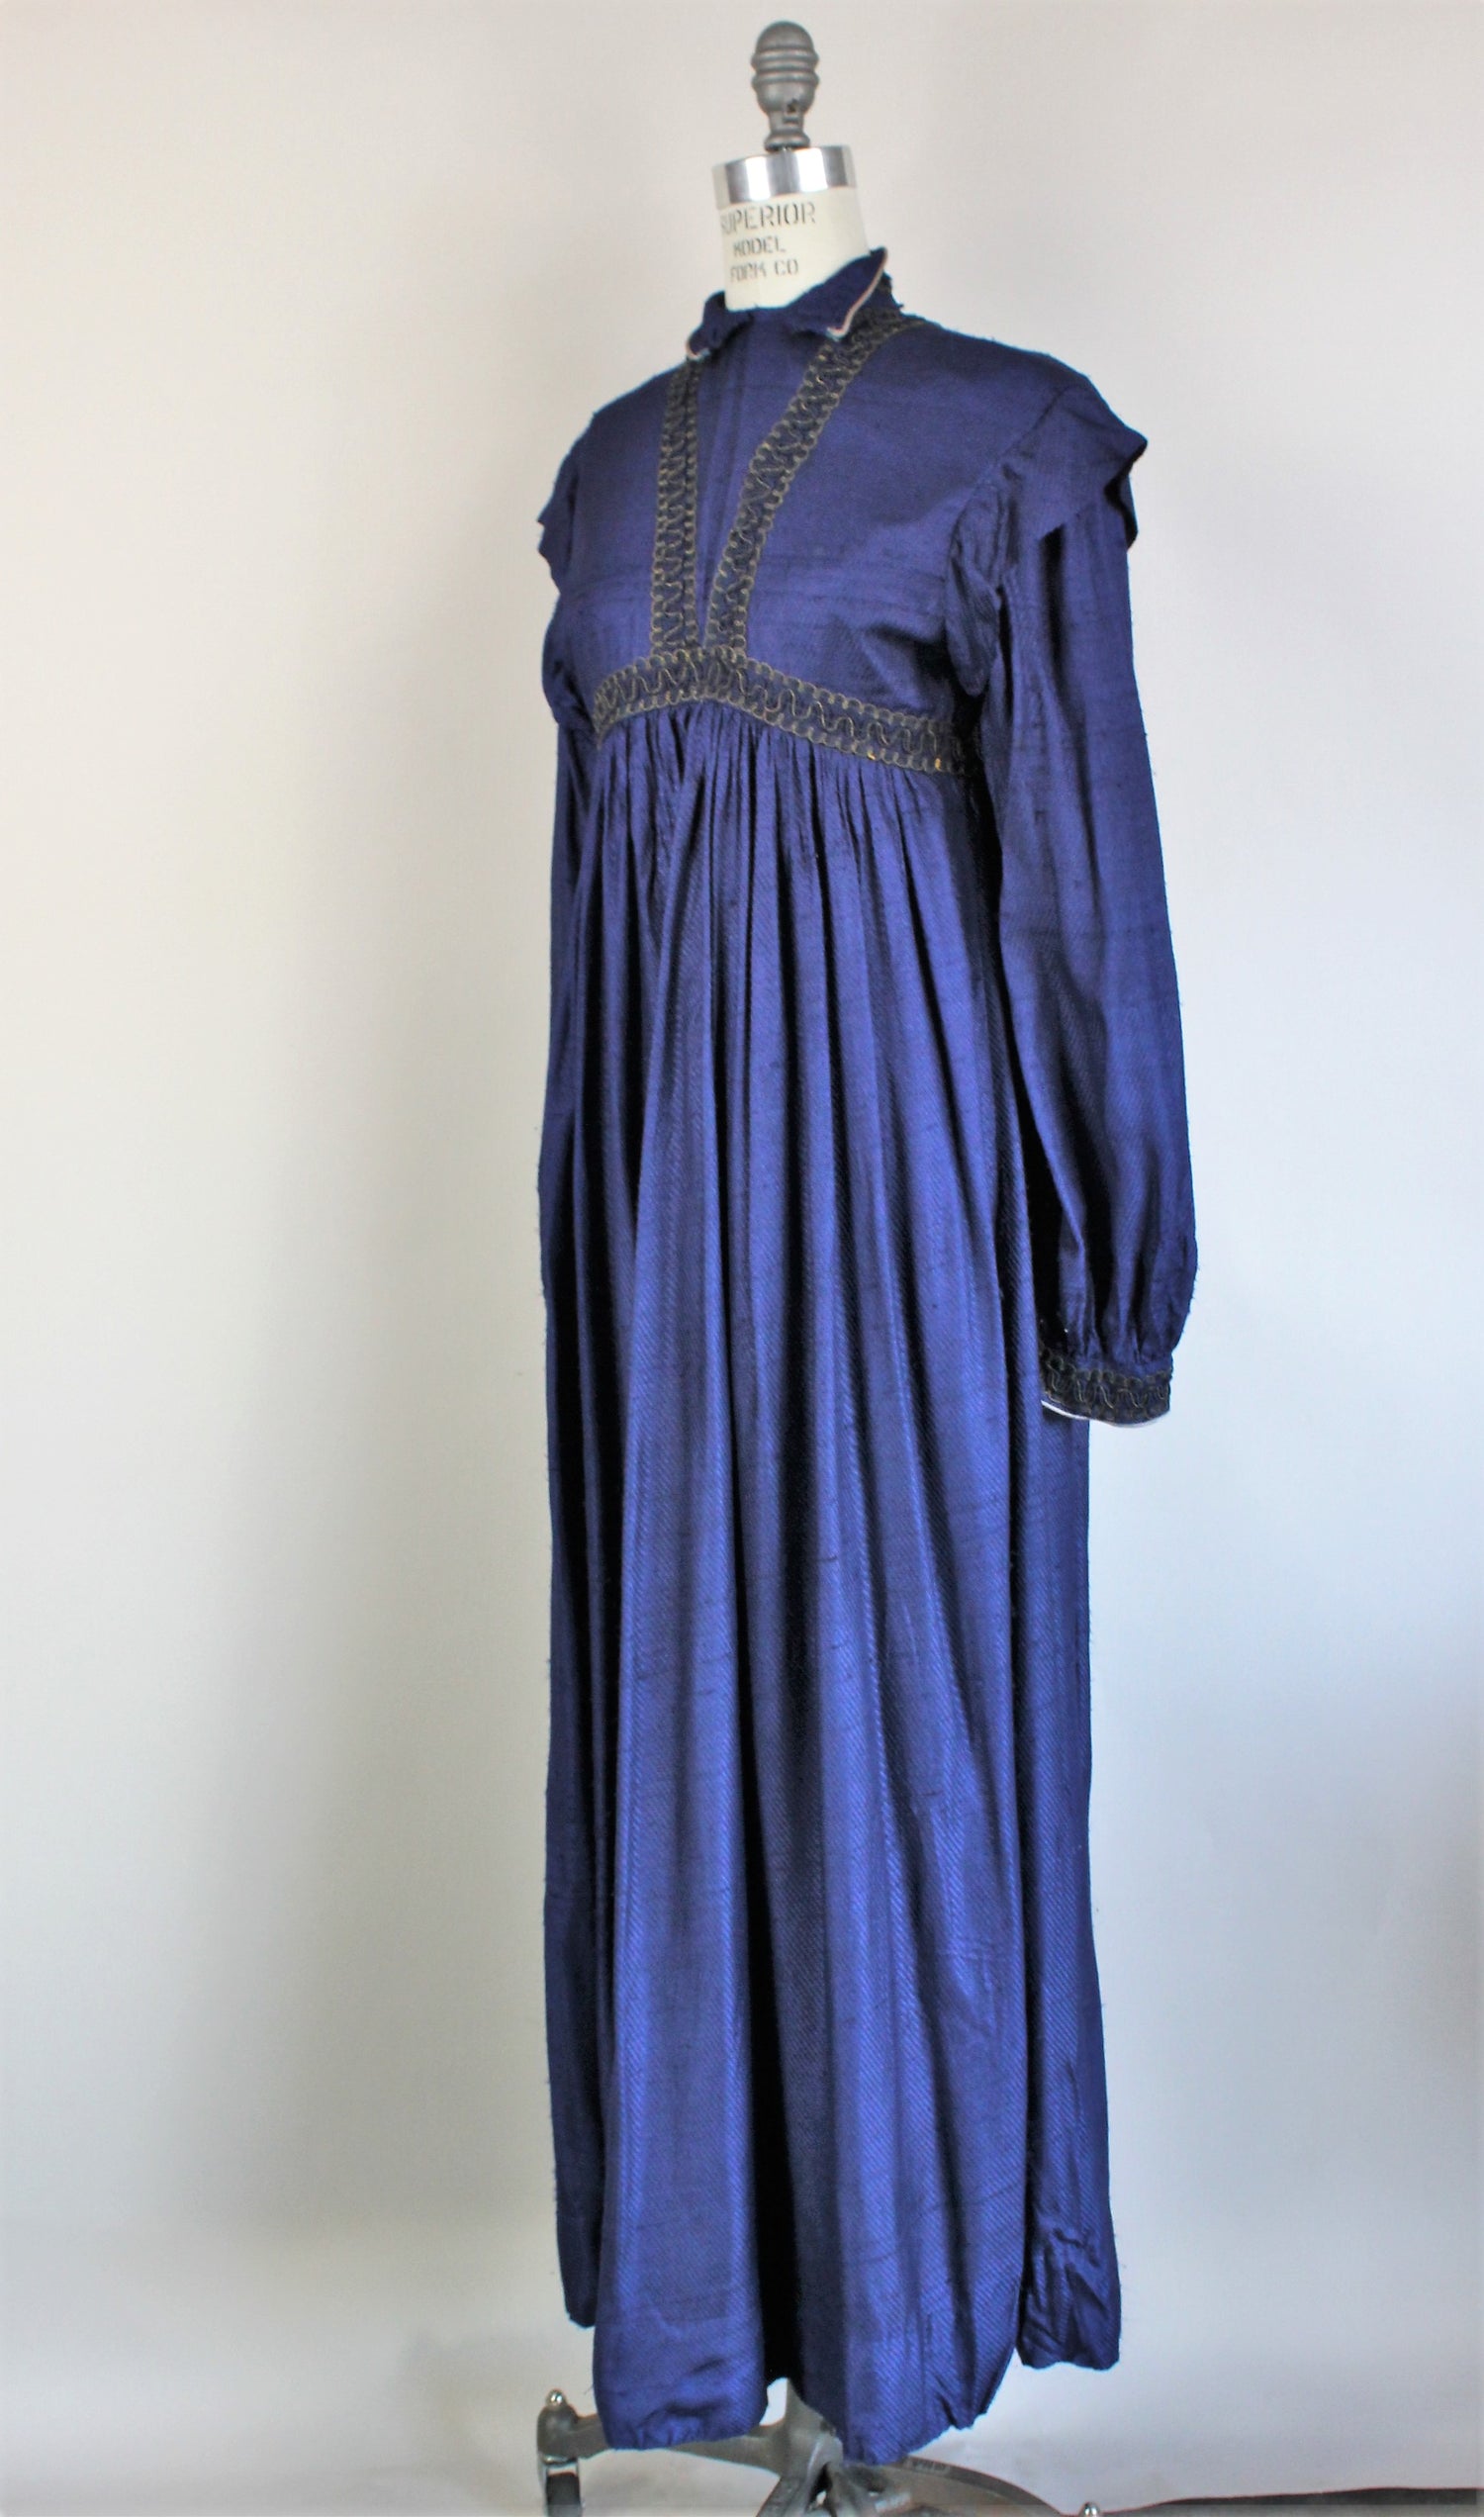 Antique 1900s Morning Or Dressing Gown